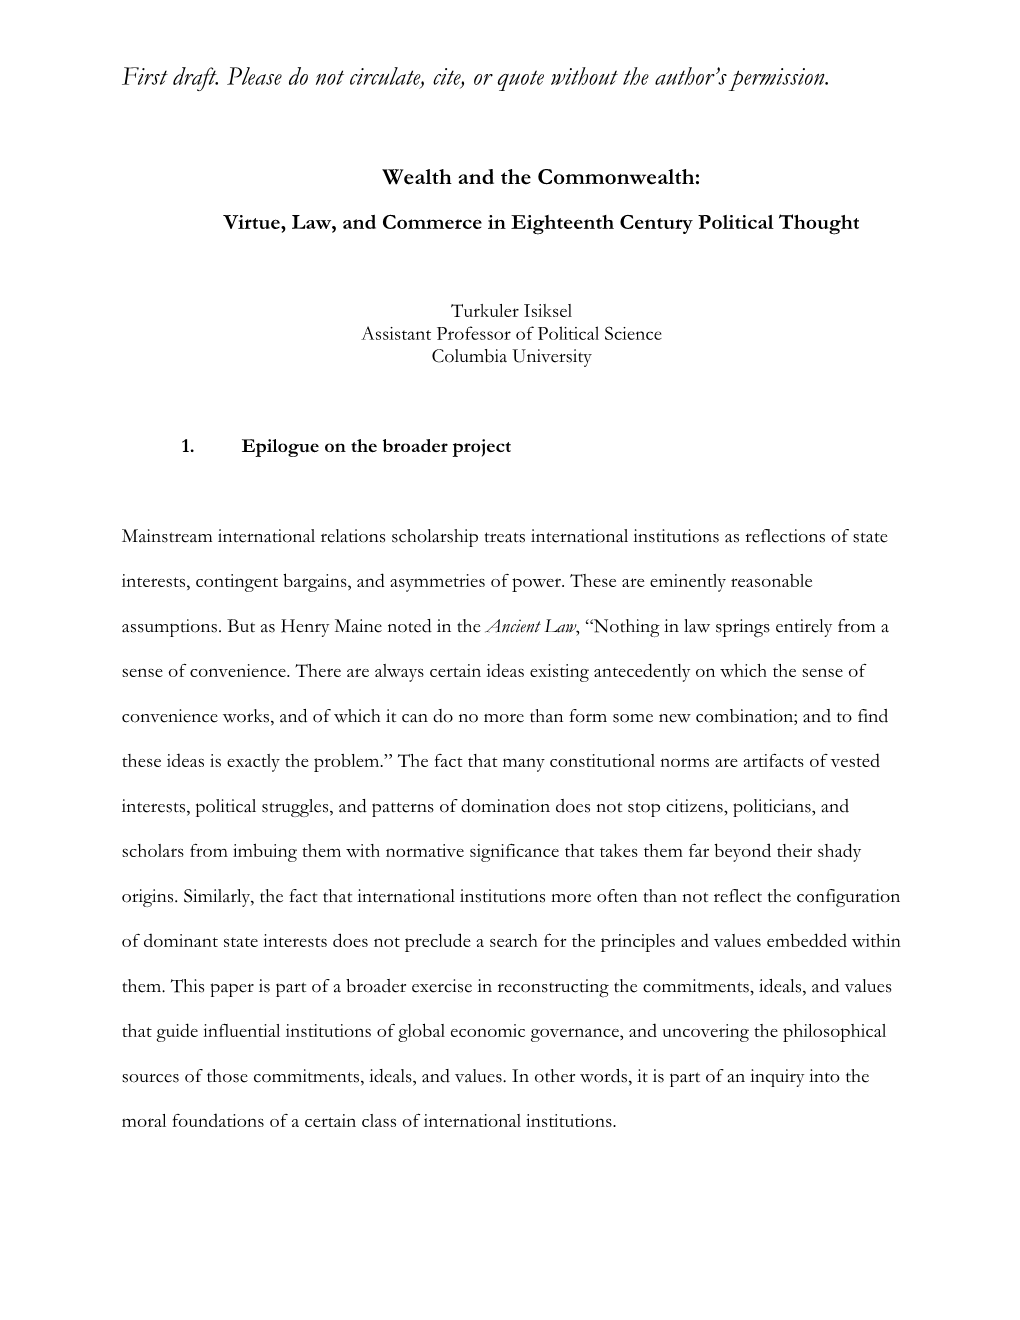 Wealth and the Commonwealth: Virtue, Law, and Commerce In